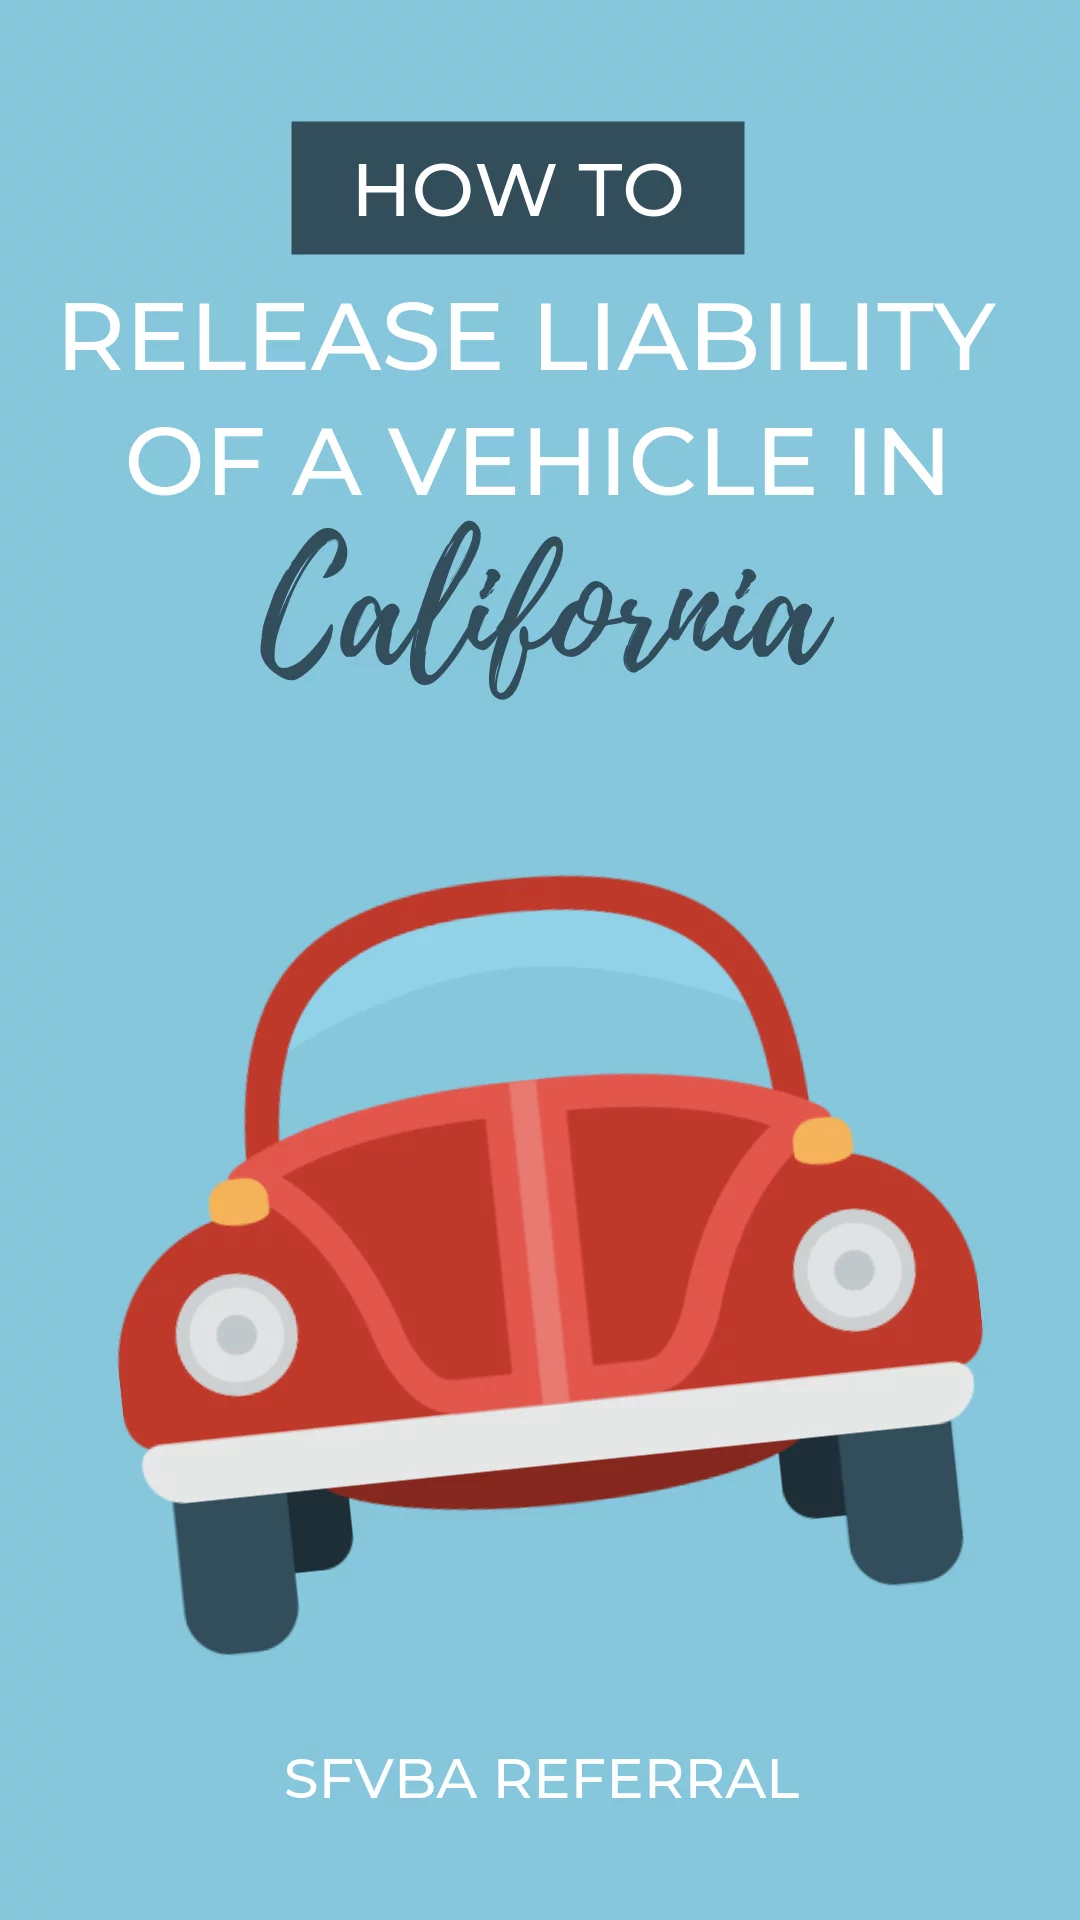 How to Release Liability of a Vehicle in California